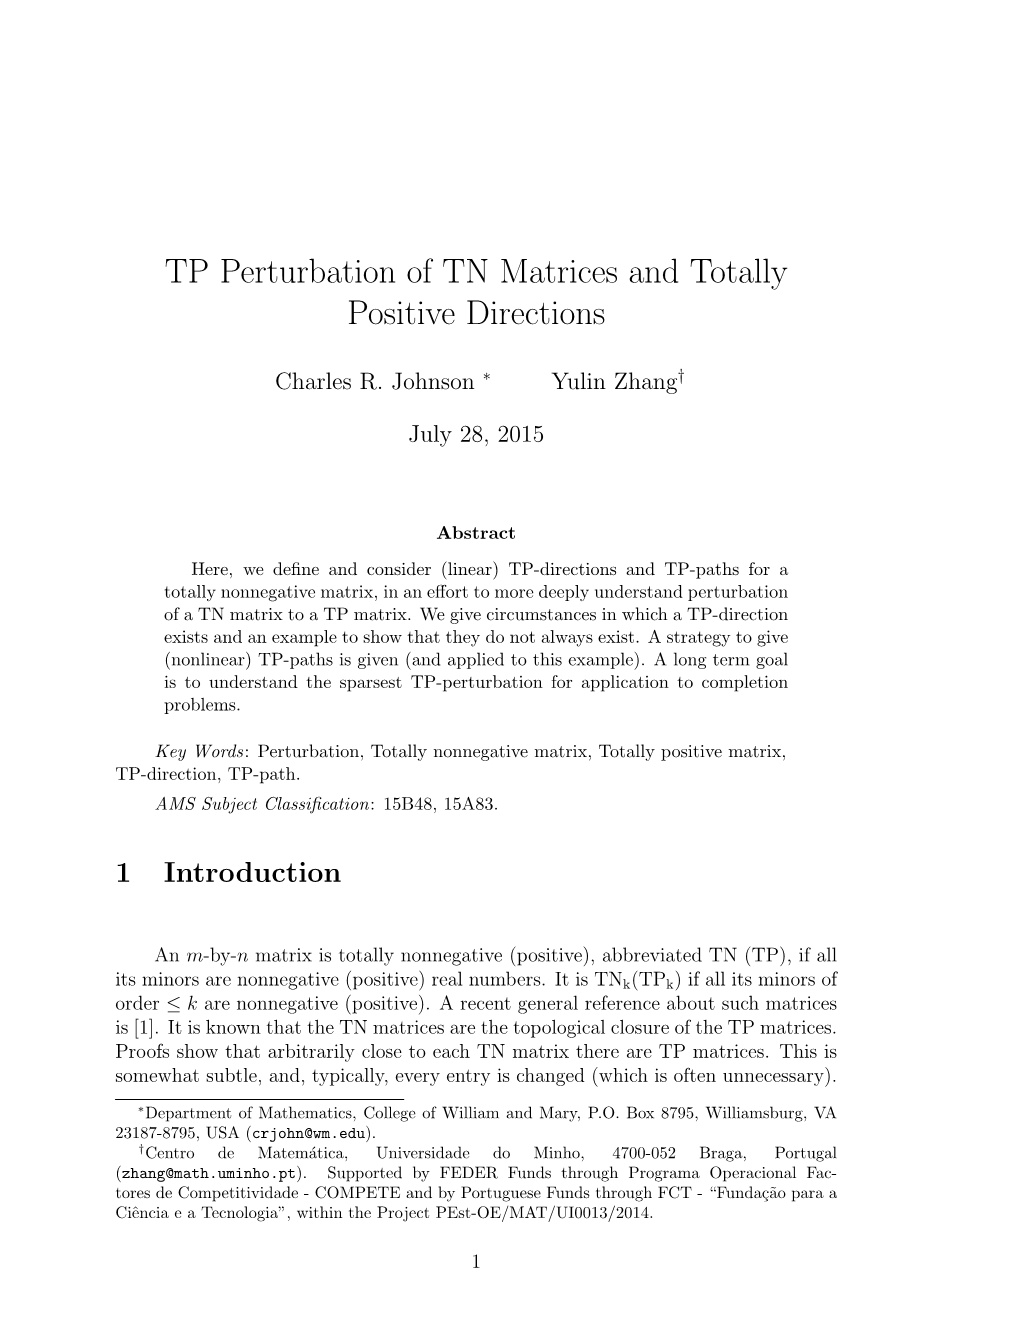 TP Perturbation of TN Matrices and Totally Positive Directions